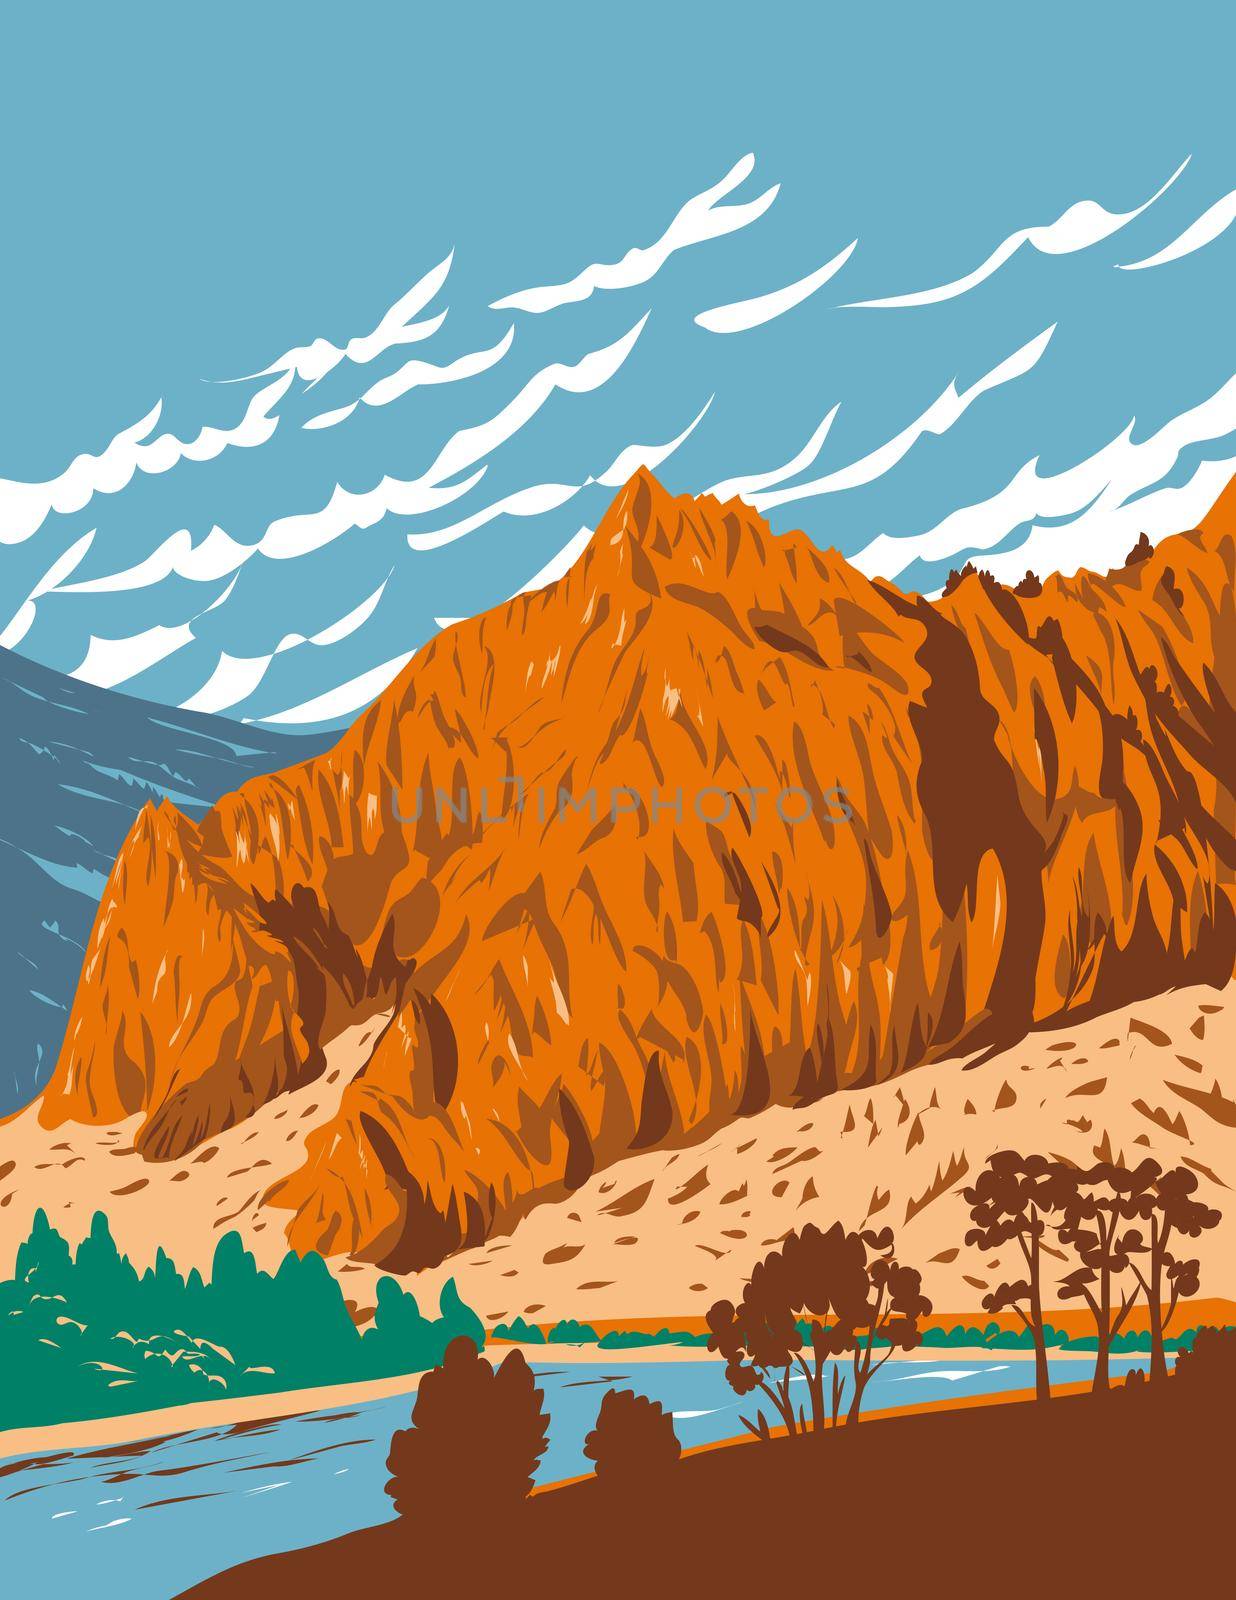 Tower Rock State Park Entrance to Missouri River Canyon in Adel Mountains Volcanic Field Montana USA WPA Poster Art by patrimonio